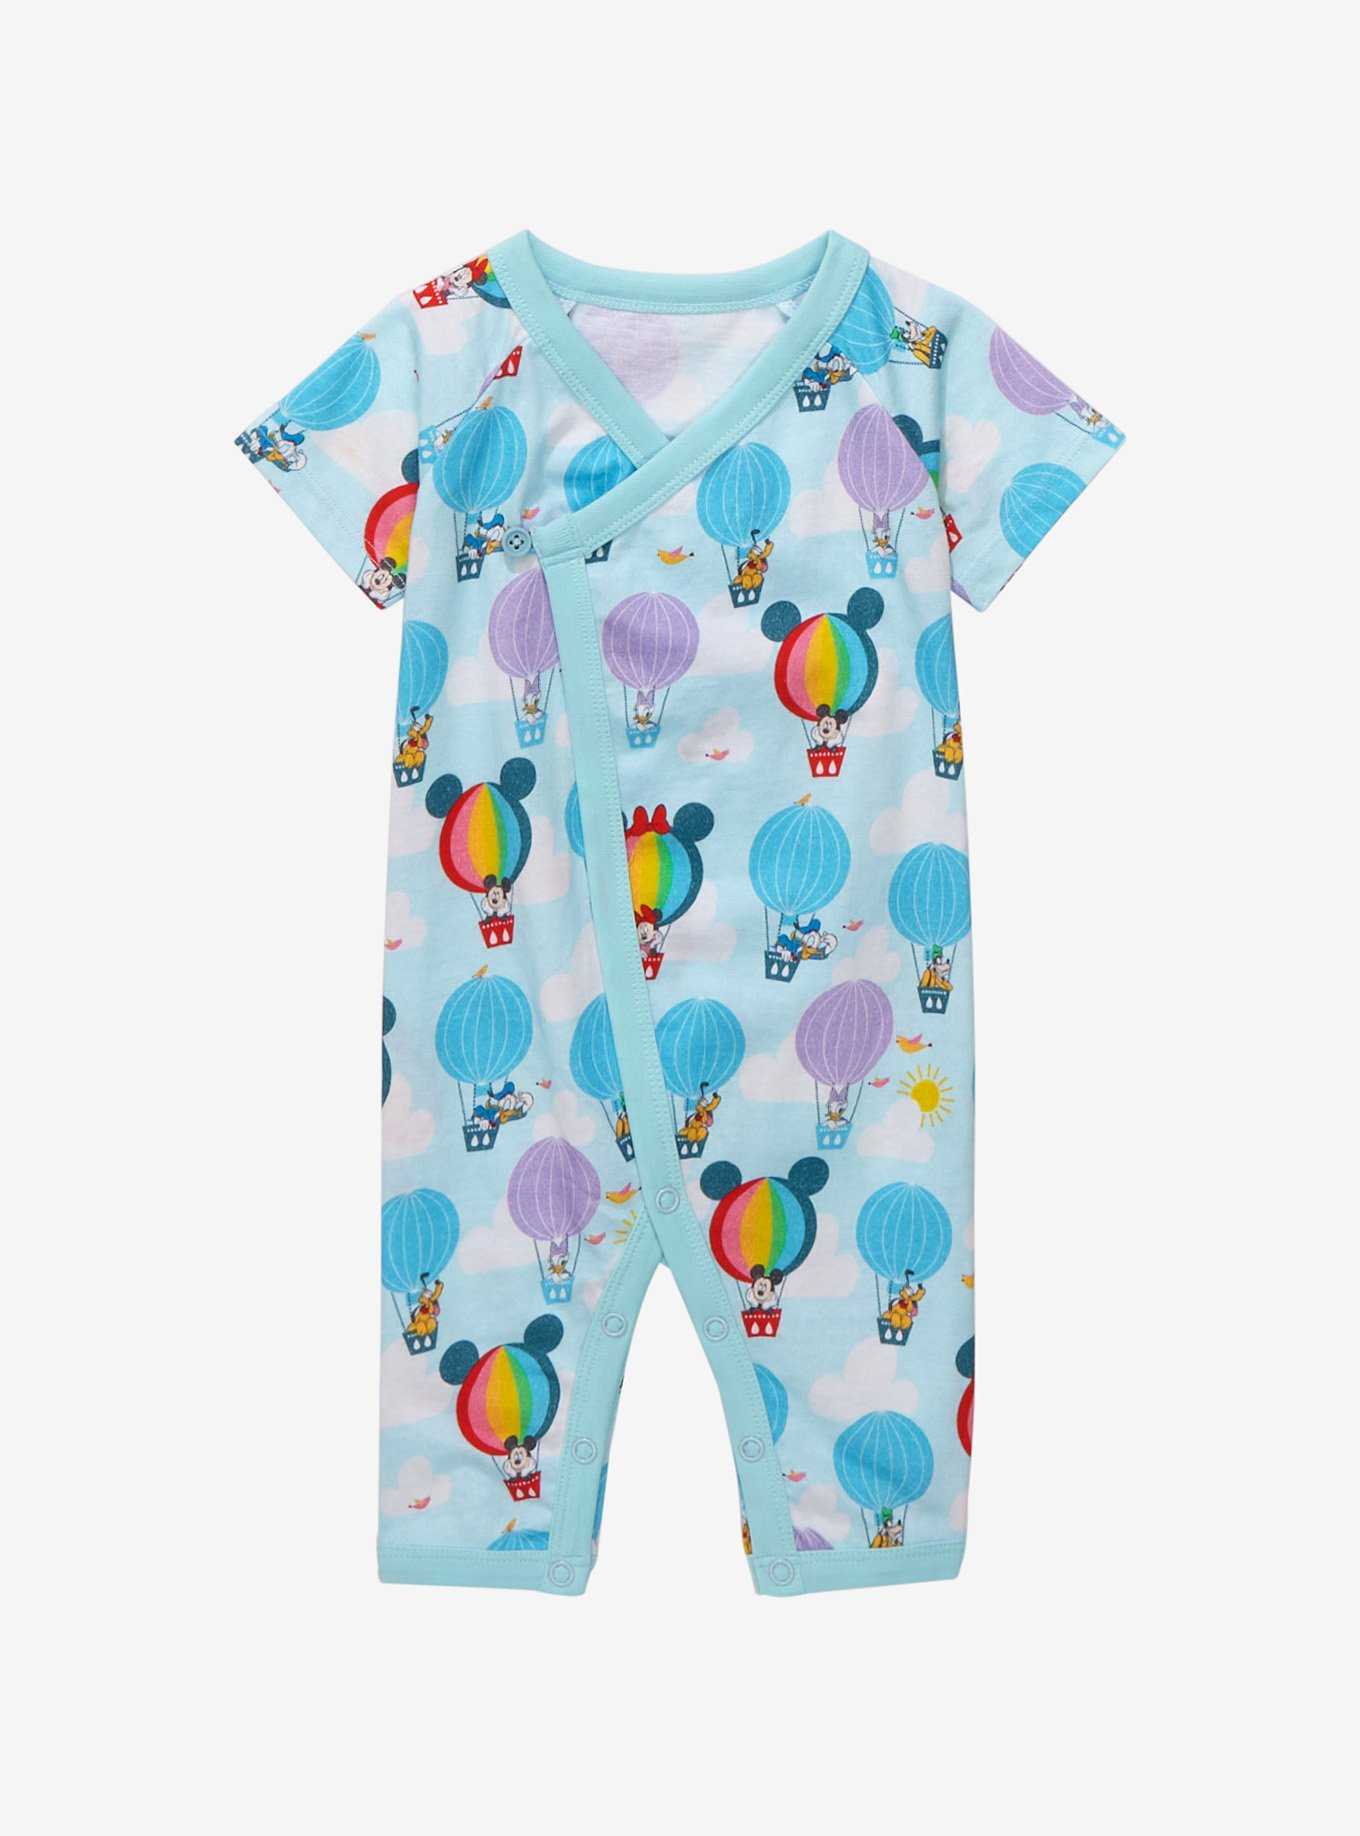 Infant Apparel: Funny & Cute Onesies for Babies